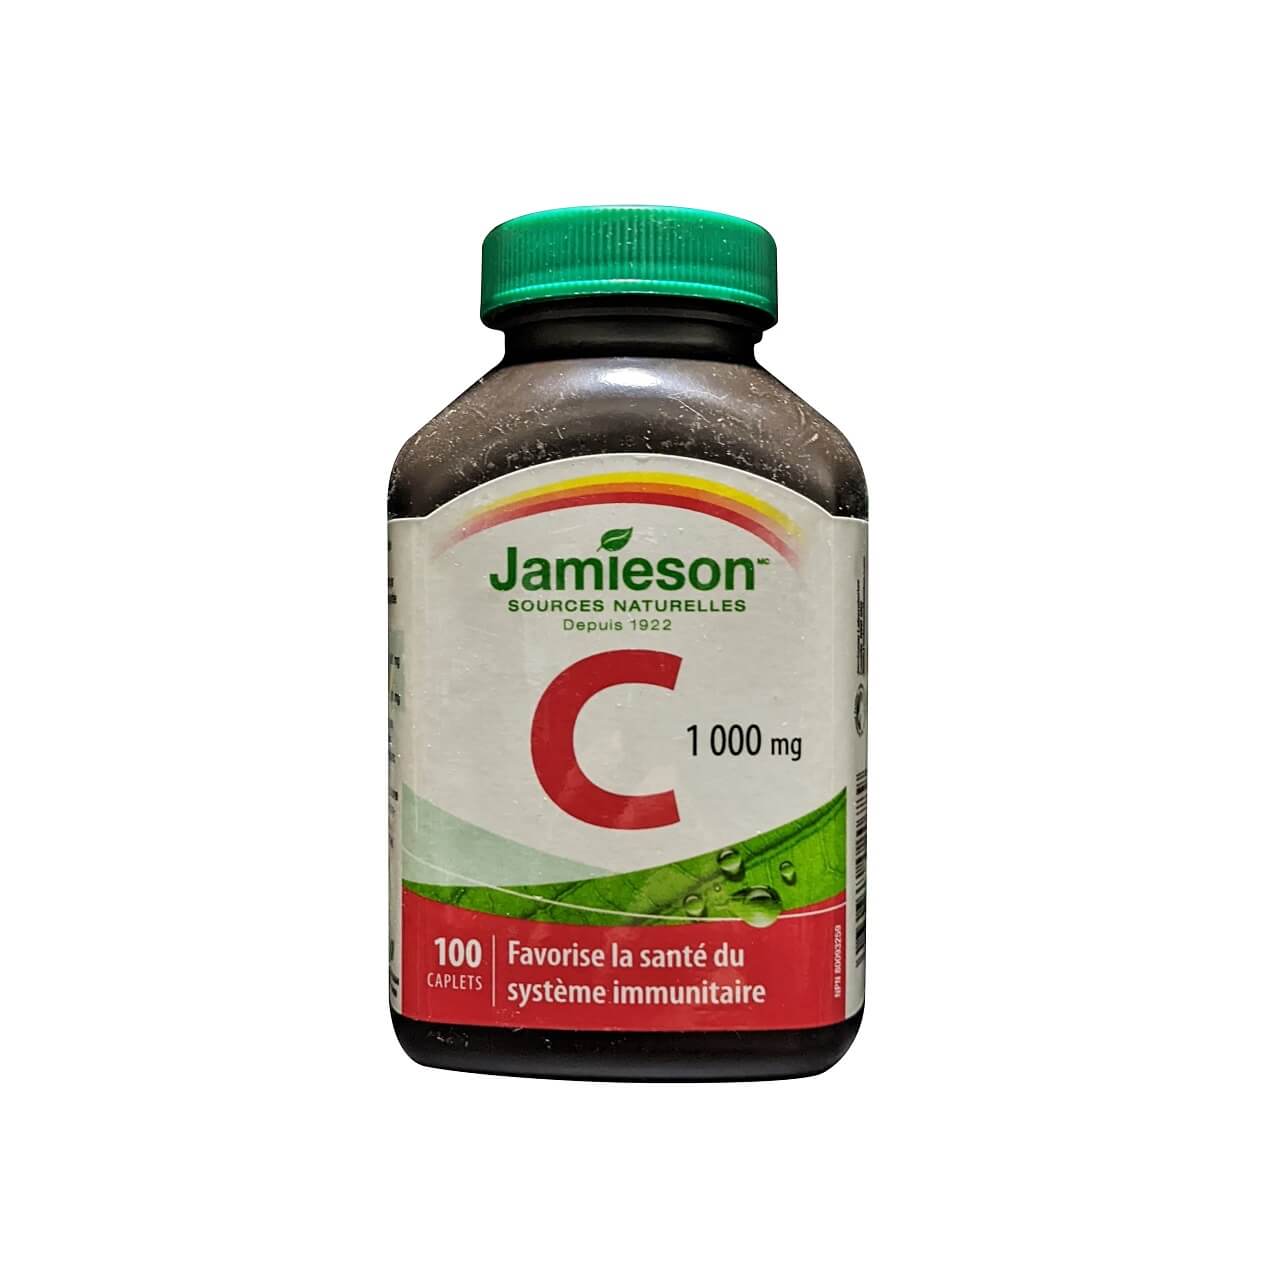 Product label for Jamieson Vitamin C 1000 mg (100 caplets) in French